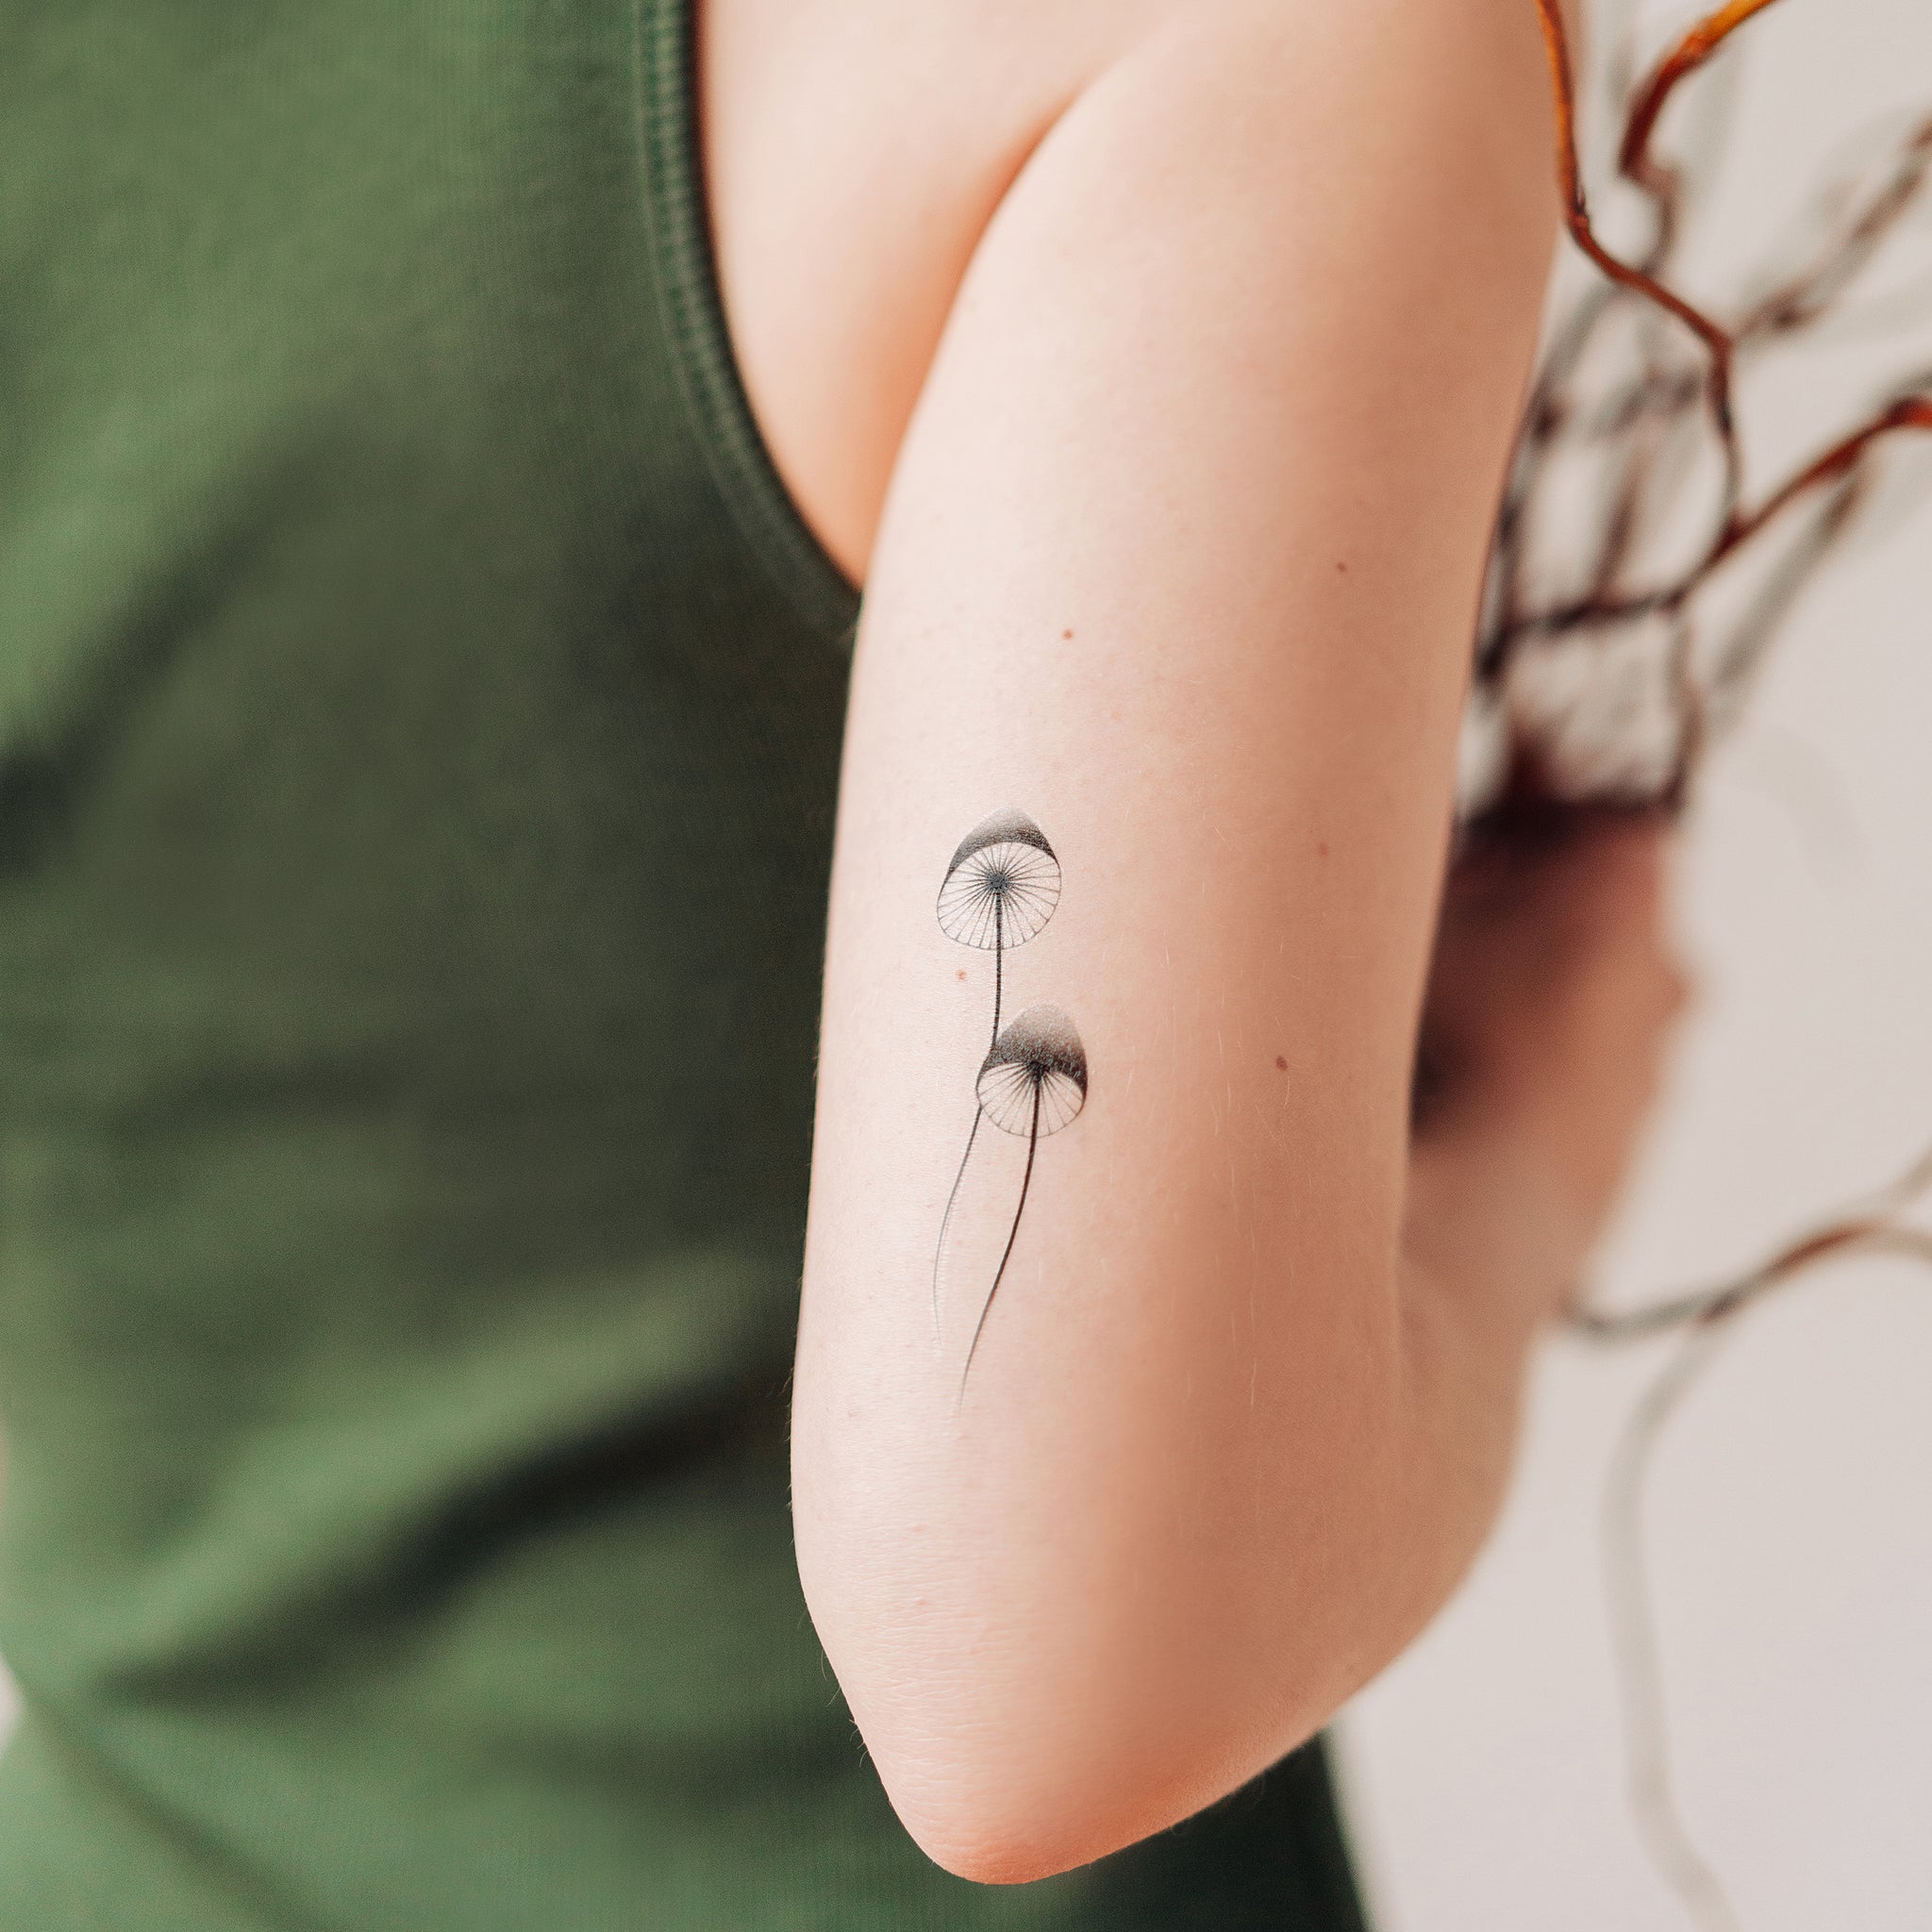 Artist gives kids realistic-looking temporary tattoos for smiles